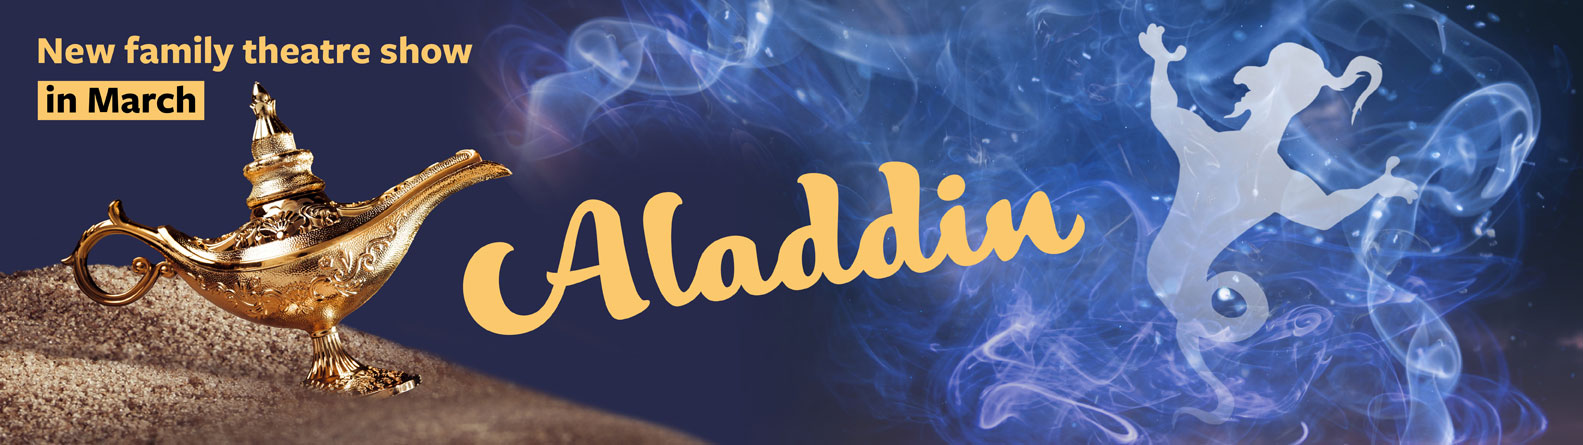 Join young Aladdin as he dreams of a life of luxury, love and adventure in Spontaneous Productions' brand new musical adaptation of the beloved Arabian nights tale, Aladdin! Catch the family theatre show from Sat Mar 04 2023 at the Sydenham Centre in SE26, South London. Book your tickets now!